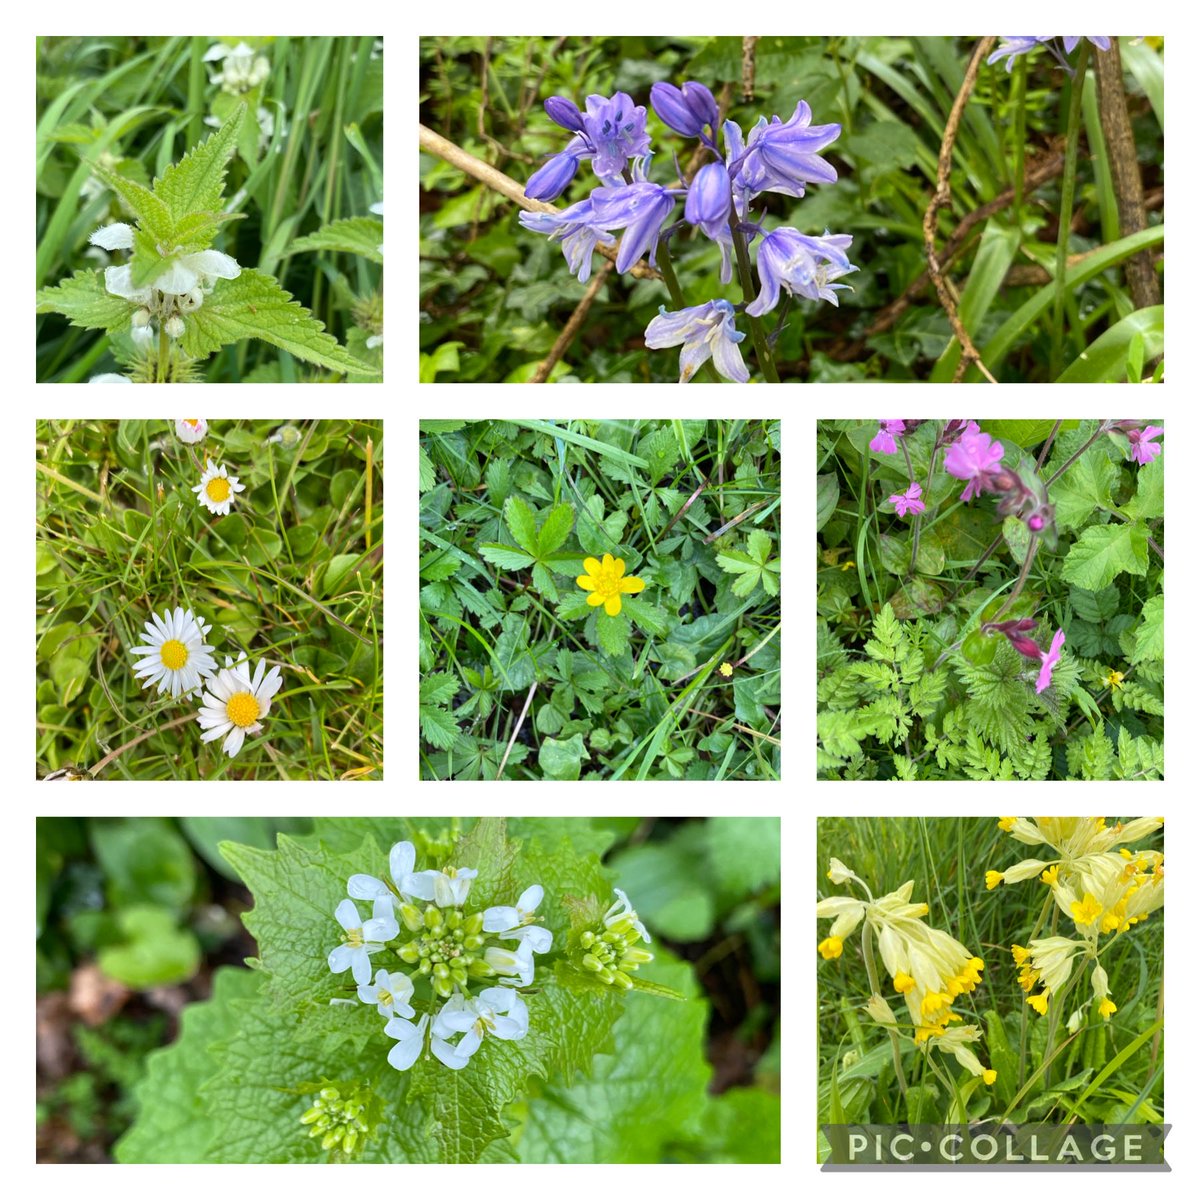 A walk on the wild side to cheer up a dull wet Sunday #sevenonsunday ⁦@365DaysWild⁩